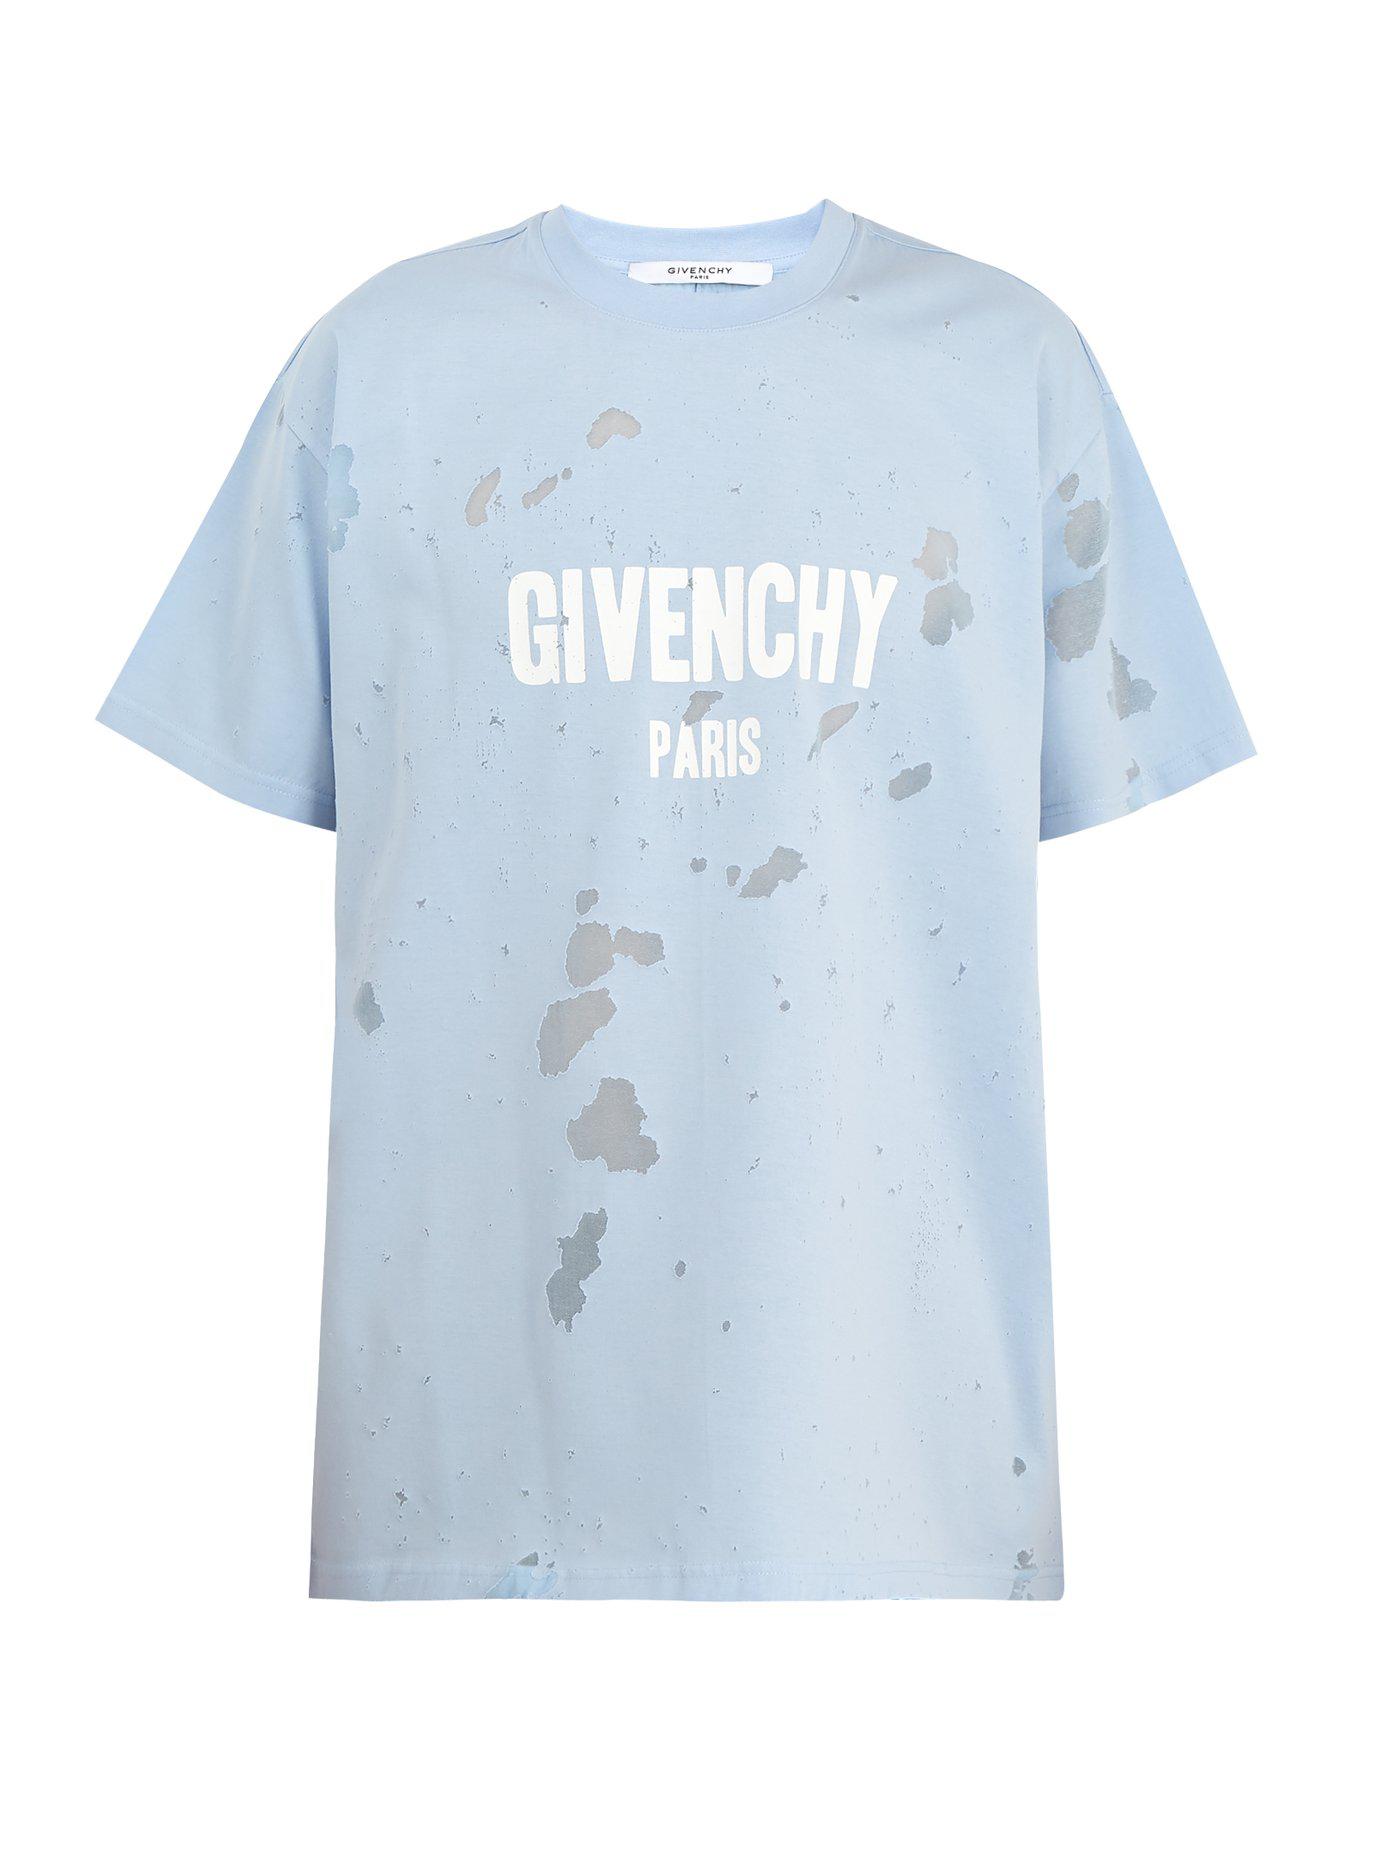 Tee Shirt Givenchy Rouge Homme Stores, 56% OFF | evanstoncinci.org